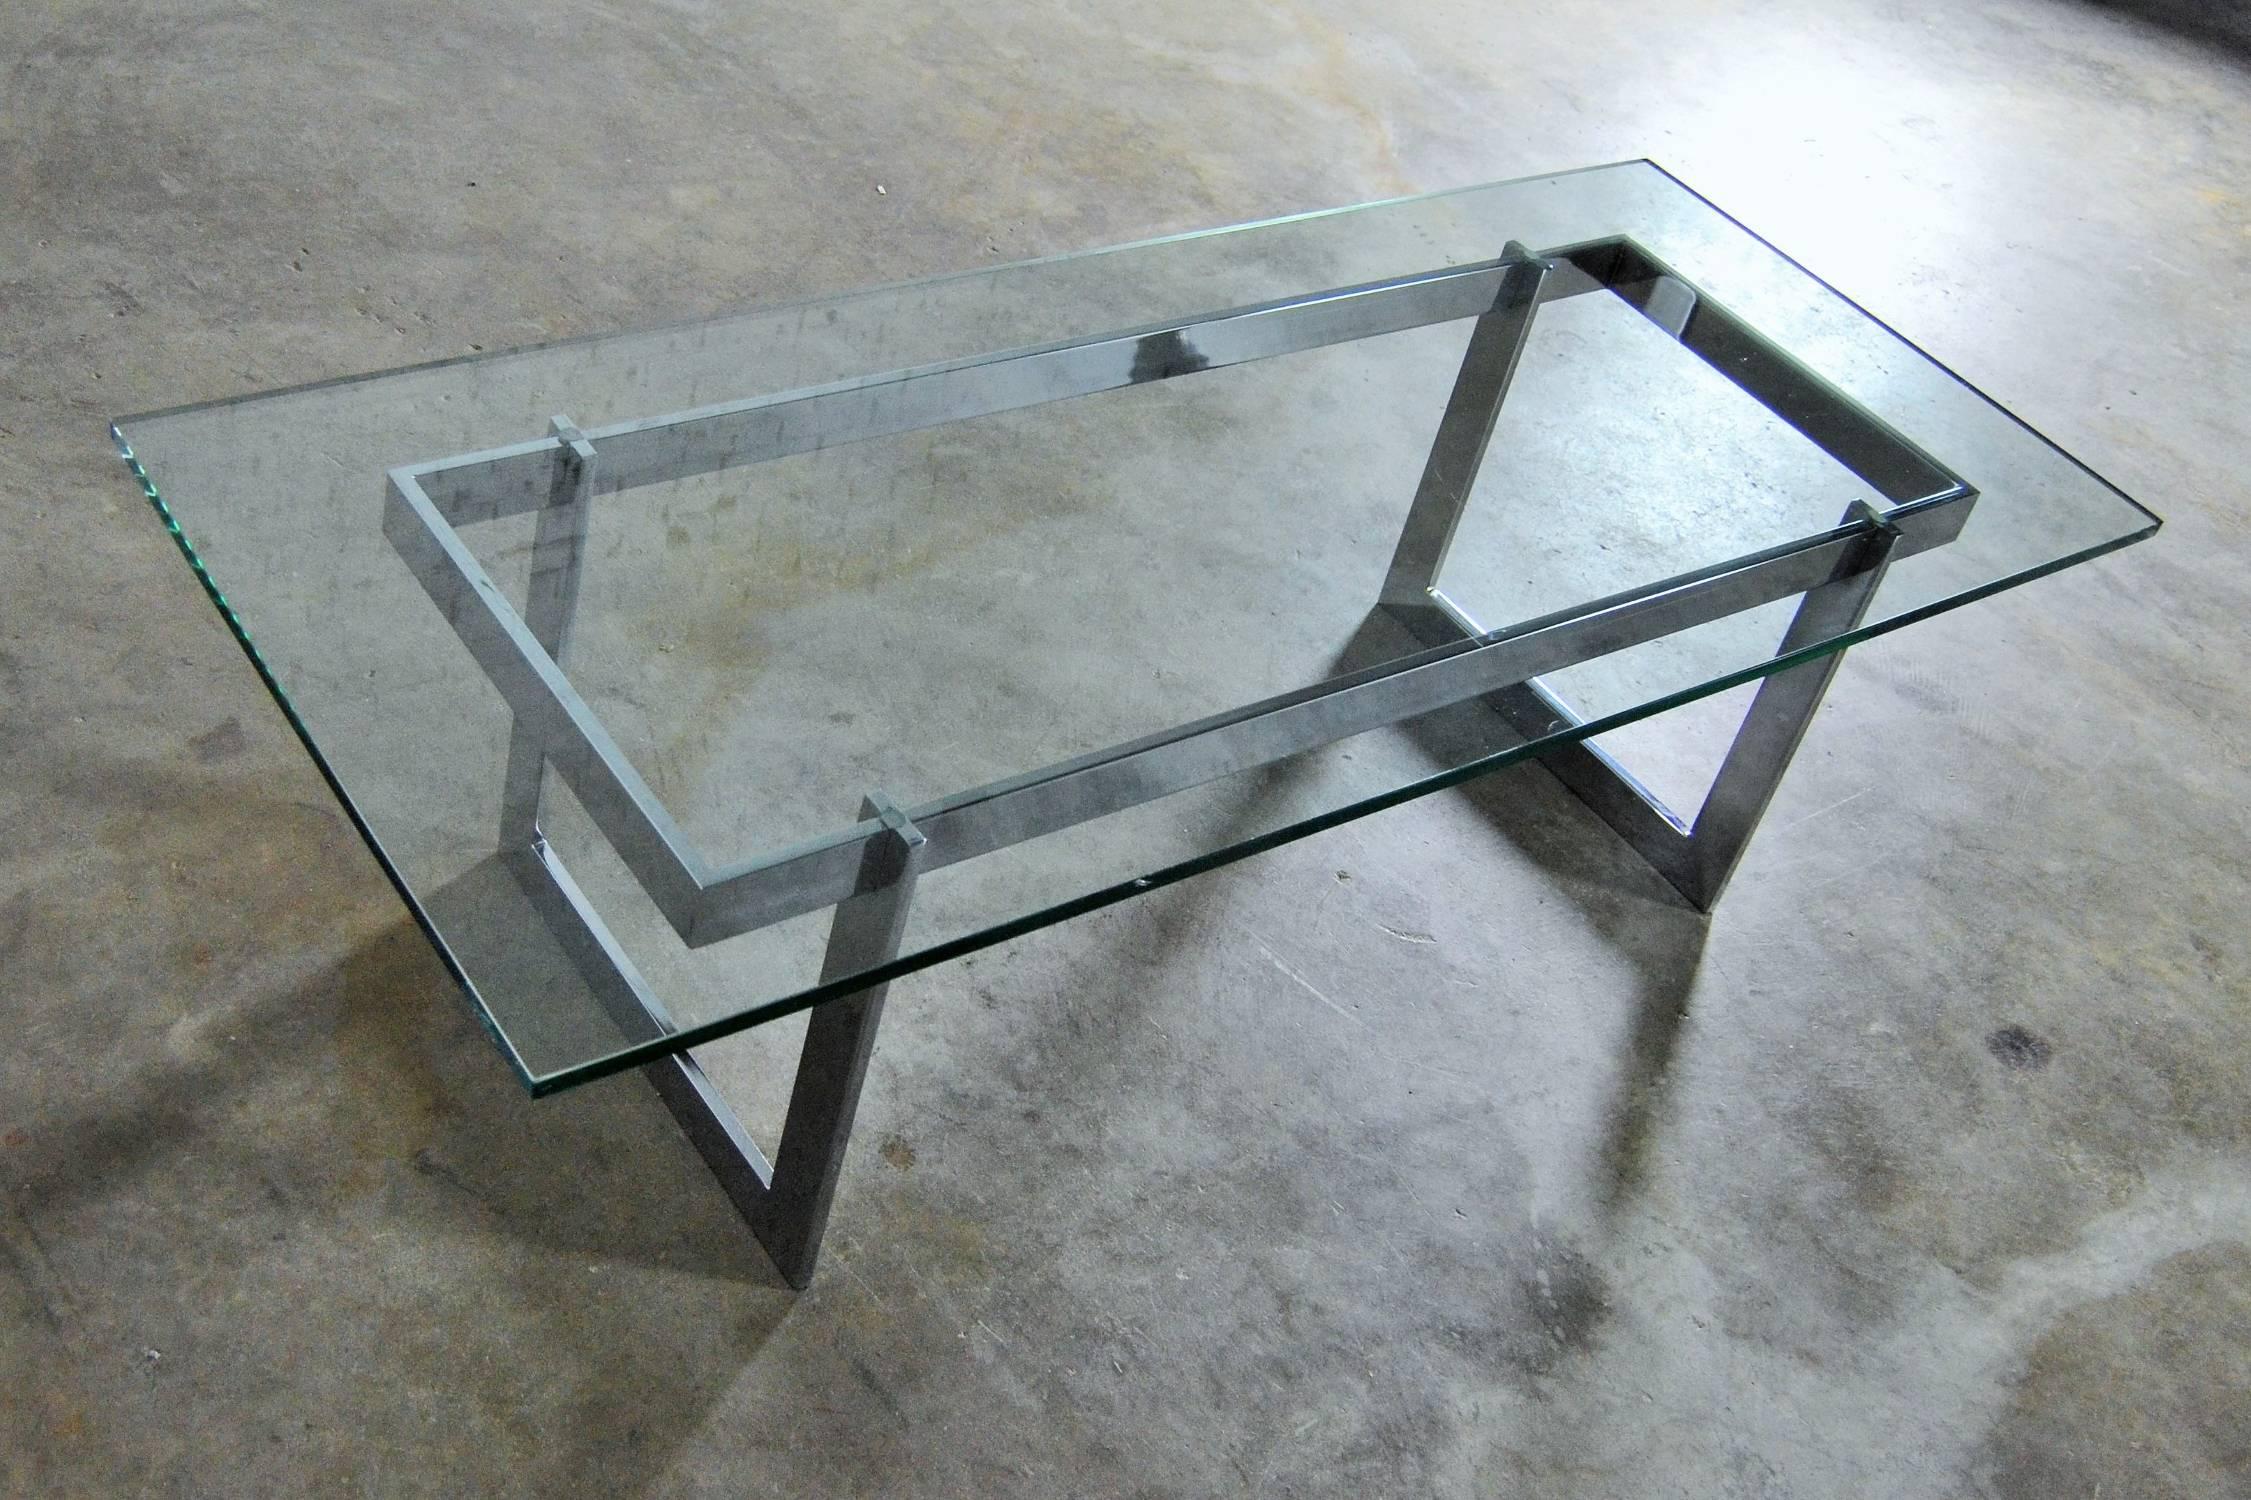 American Vintage Mid-Century Modern, Milo Baughman Style Chrome and Glass Coffee Table